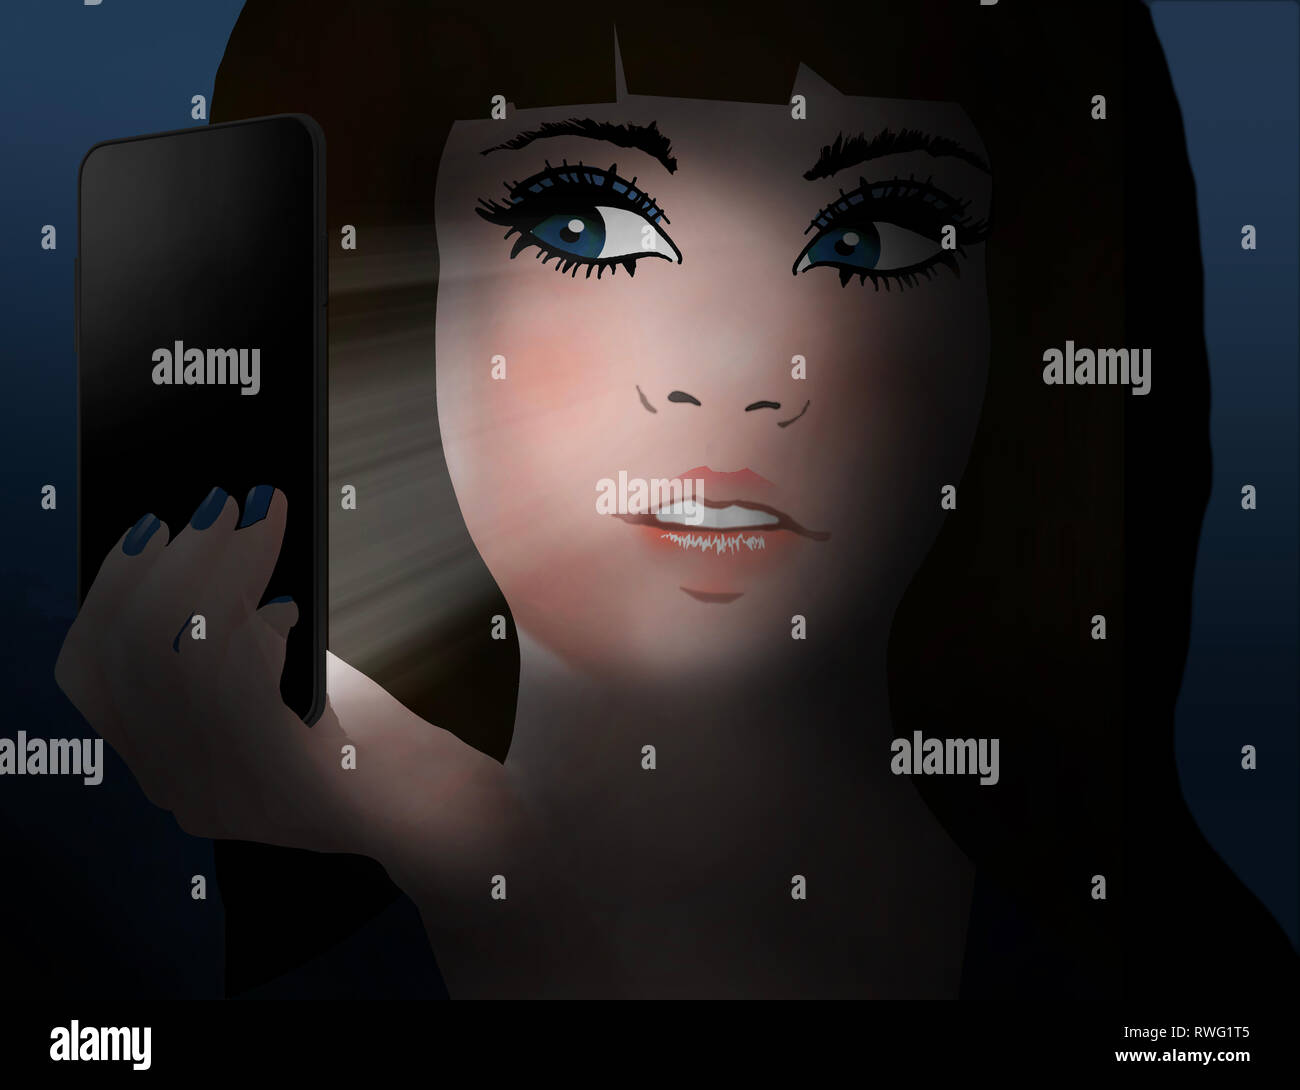 A teen girl looks at her cell phone that is emitting the light that illuminates her face. This is an illustration. Stock Photo